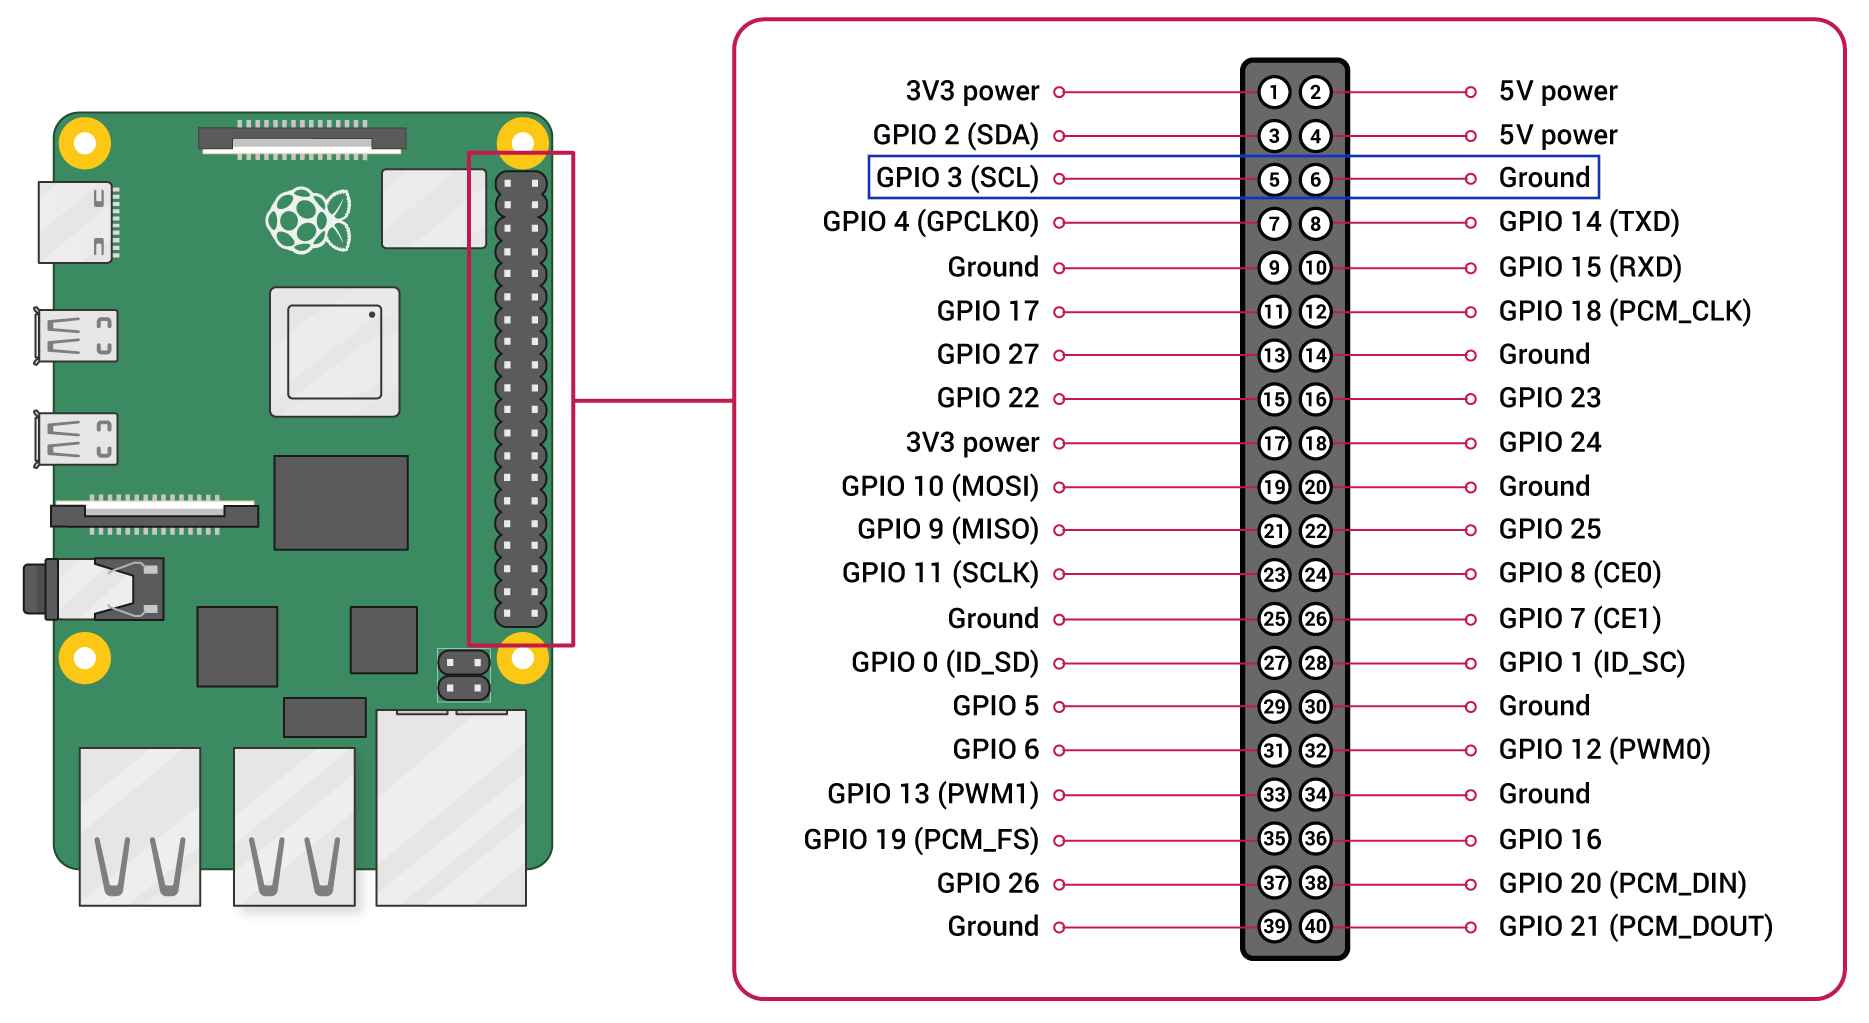 Raspberry Pi GPIOs highlighting the Pin#5 (GPIO3) and Pin#6 (GND)